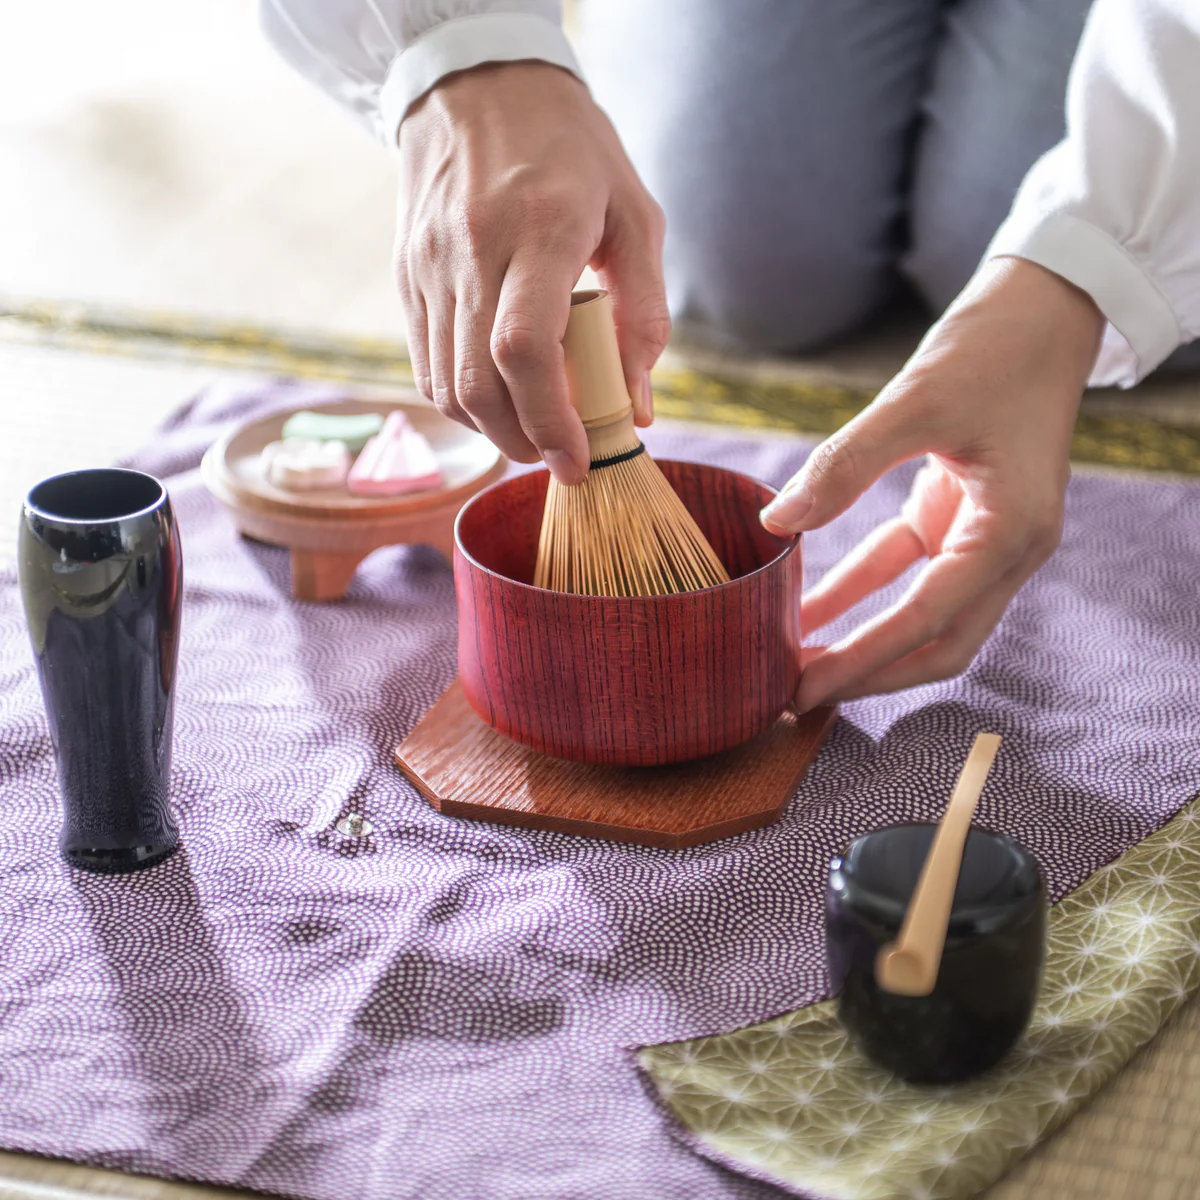 a person whisking matcha. She is kneeling on a tatami floor and holding the chawan tea bowl and bamboo whisk